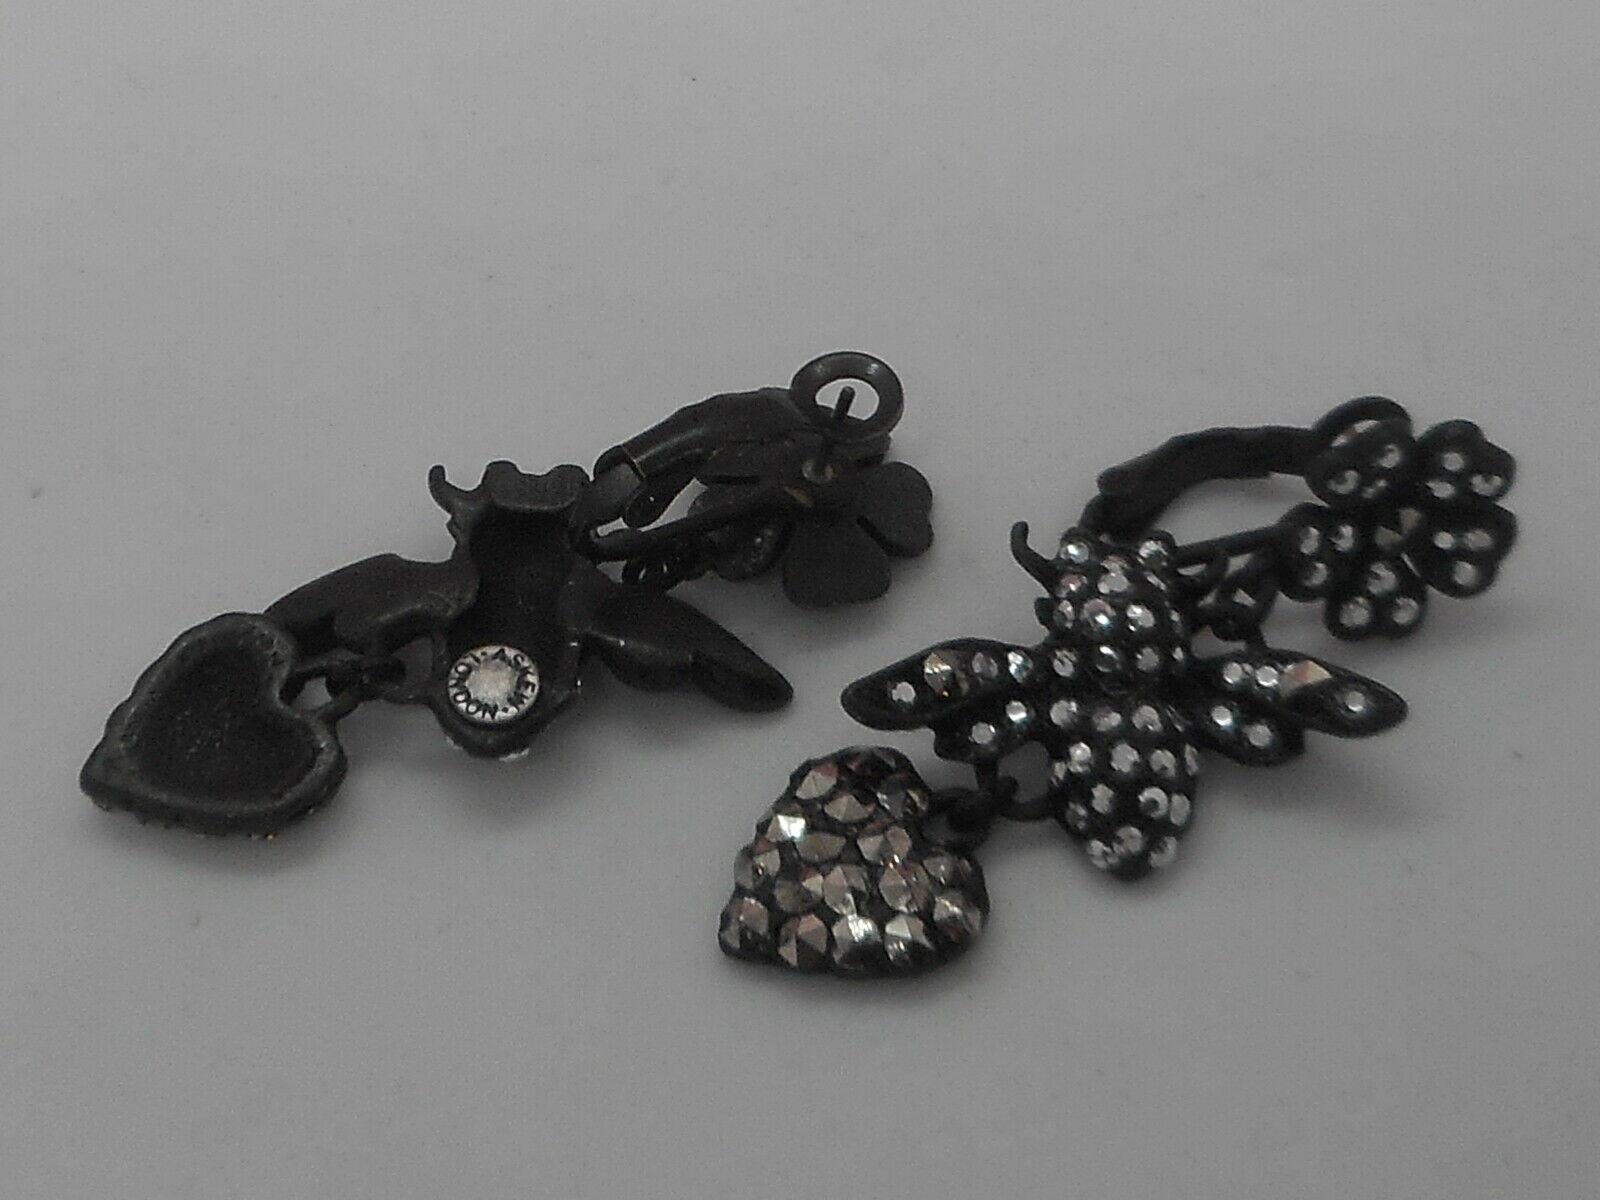 Signed Askew London Hearts Flowers and Bees  in Matt Black; set with Diamante Sparkling Crystals. Pierced clip earring fittings. Earrings measure approx. 2.00'' X 0.75''.  Signed: Askew London. An Exciting Fashion Statement! More Beautiful in Real